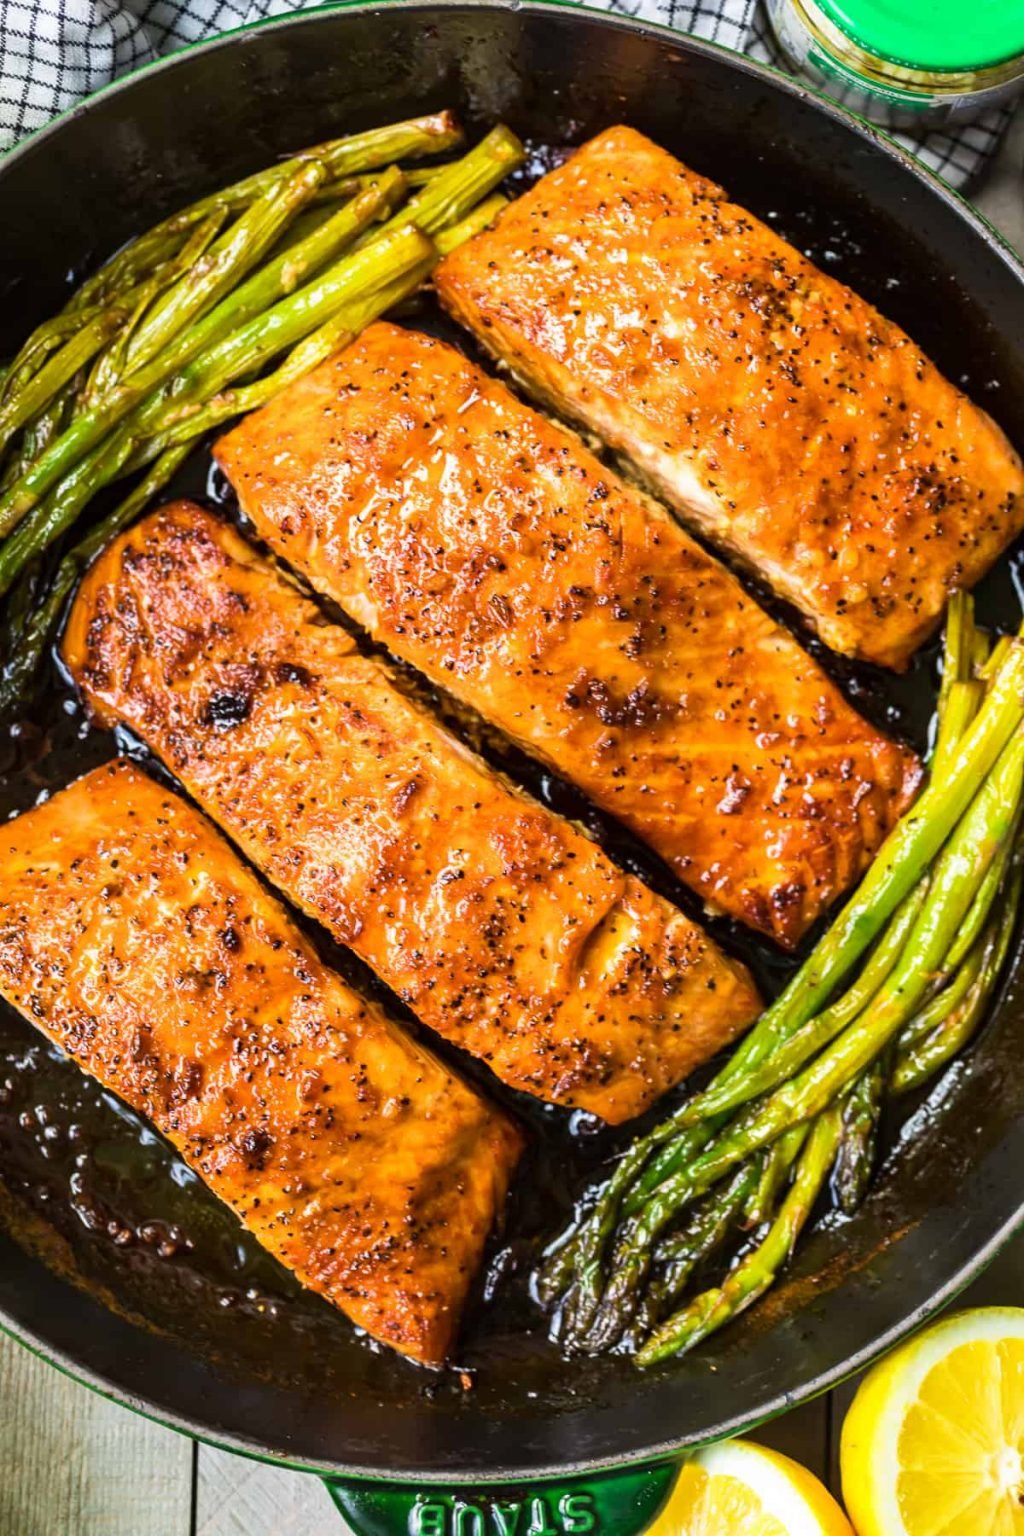 50 BEST Salmon Recipes (Top-Rated!) - foodiecrush.com